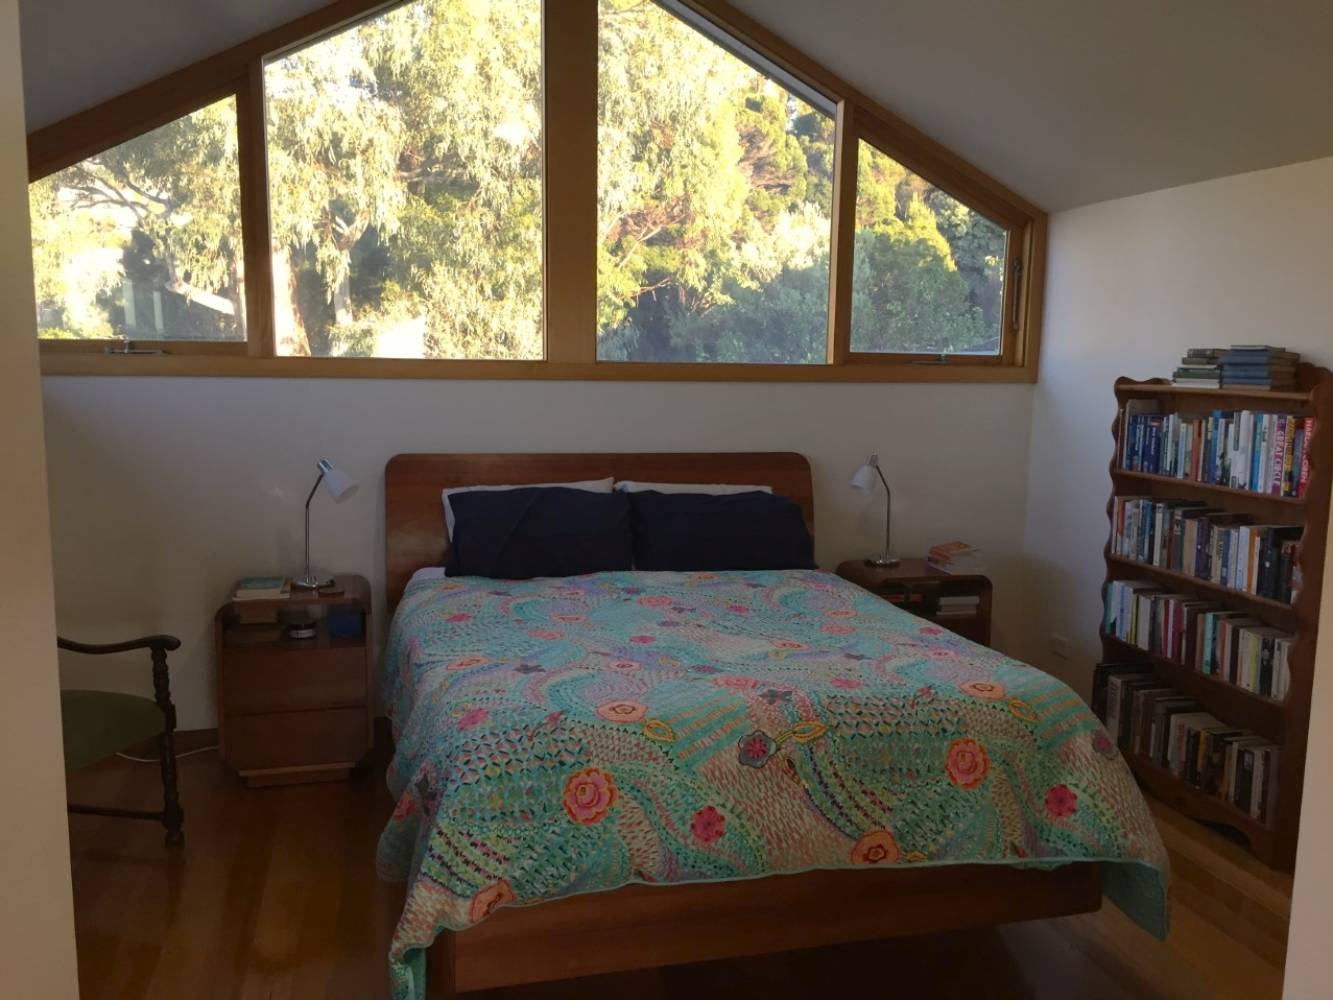 upstairs "tree house" bedroom with queen bed